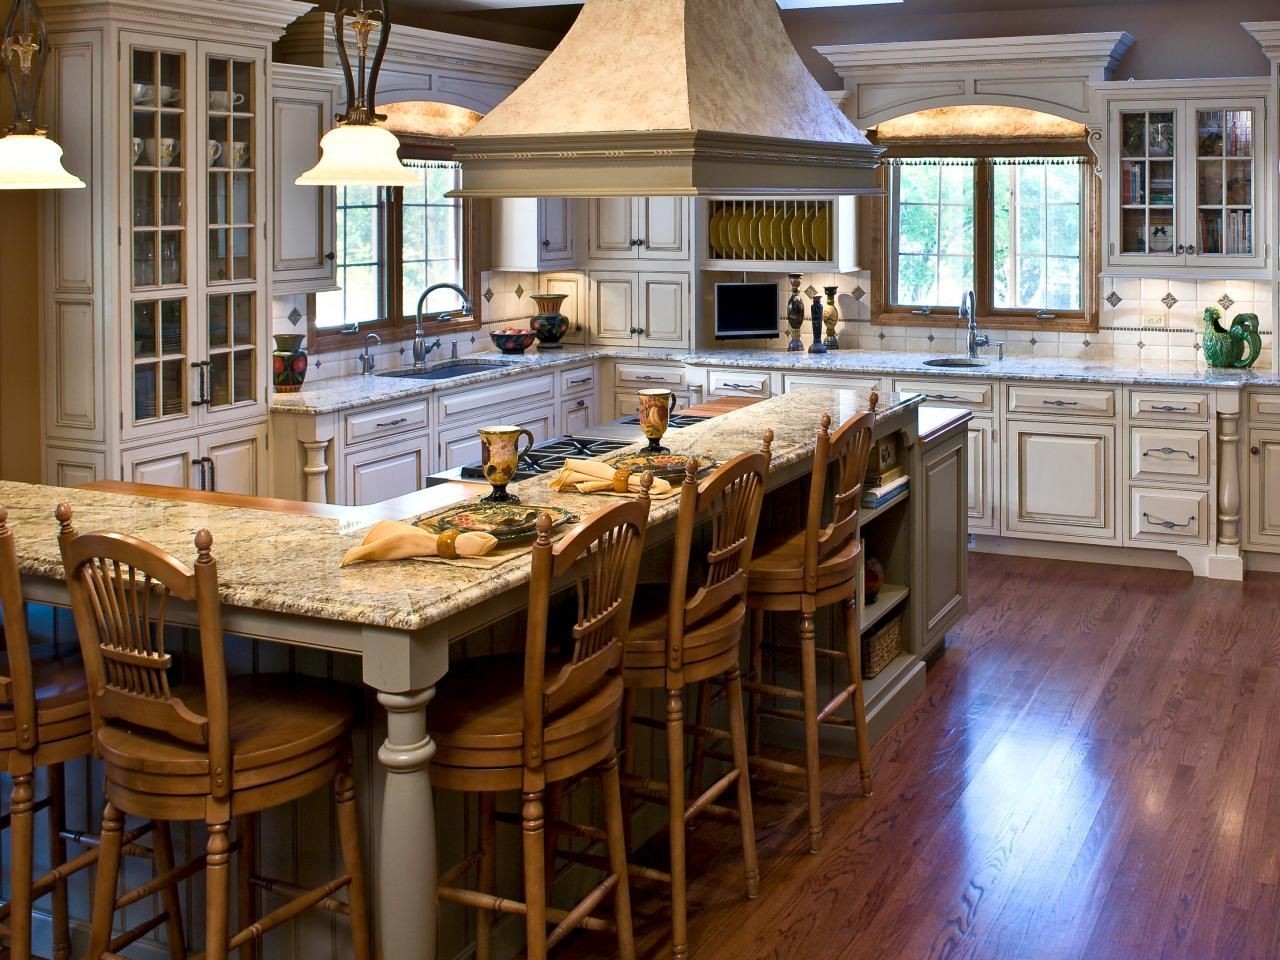 This kitchen combines a soft french country look with modern